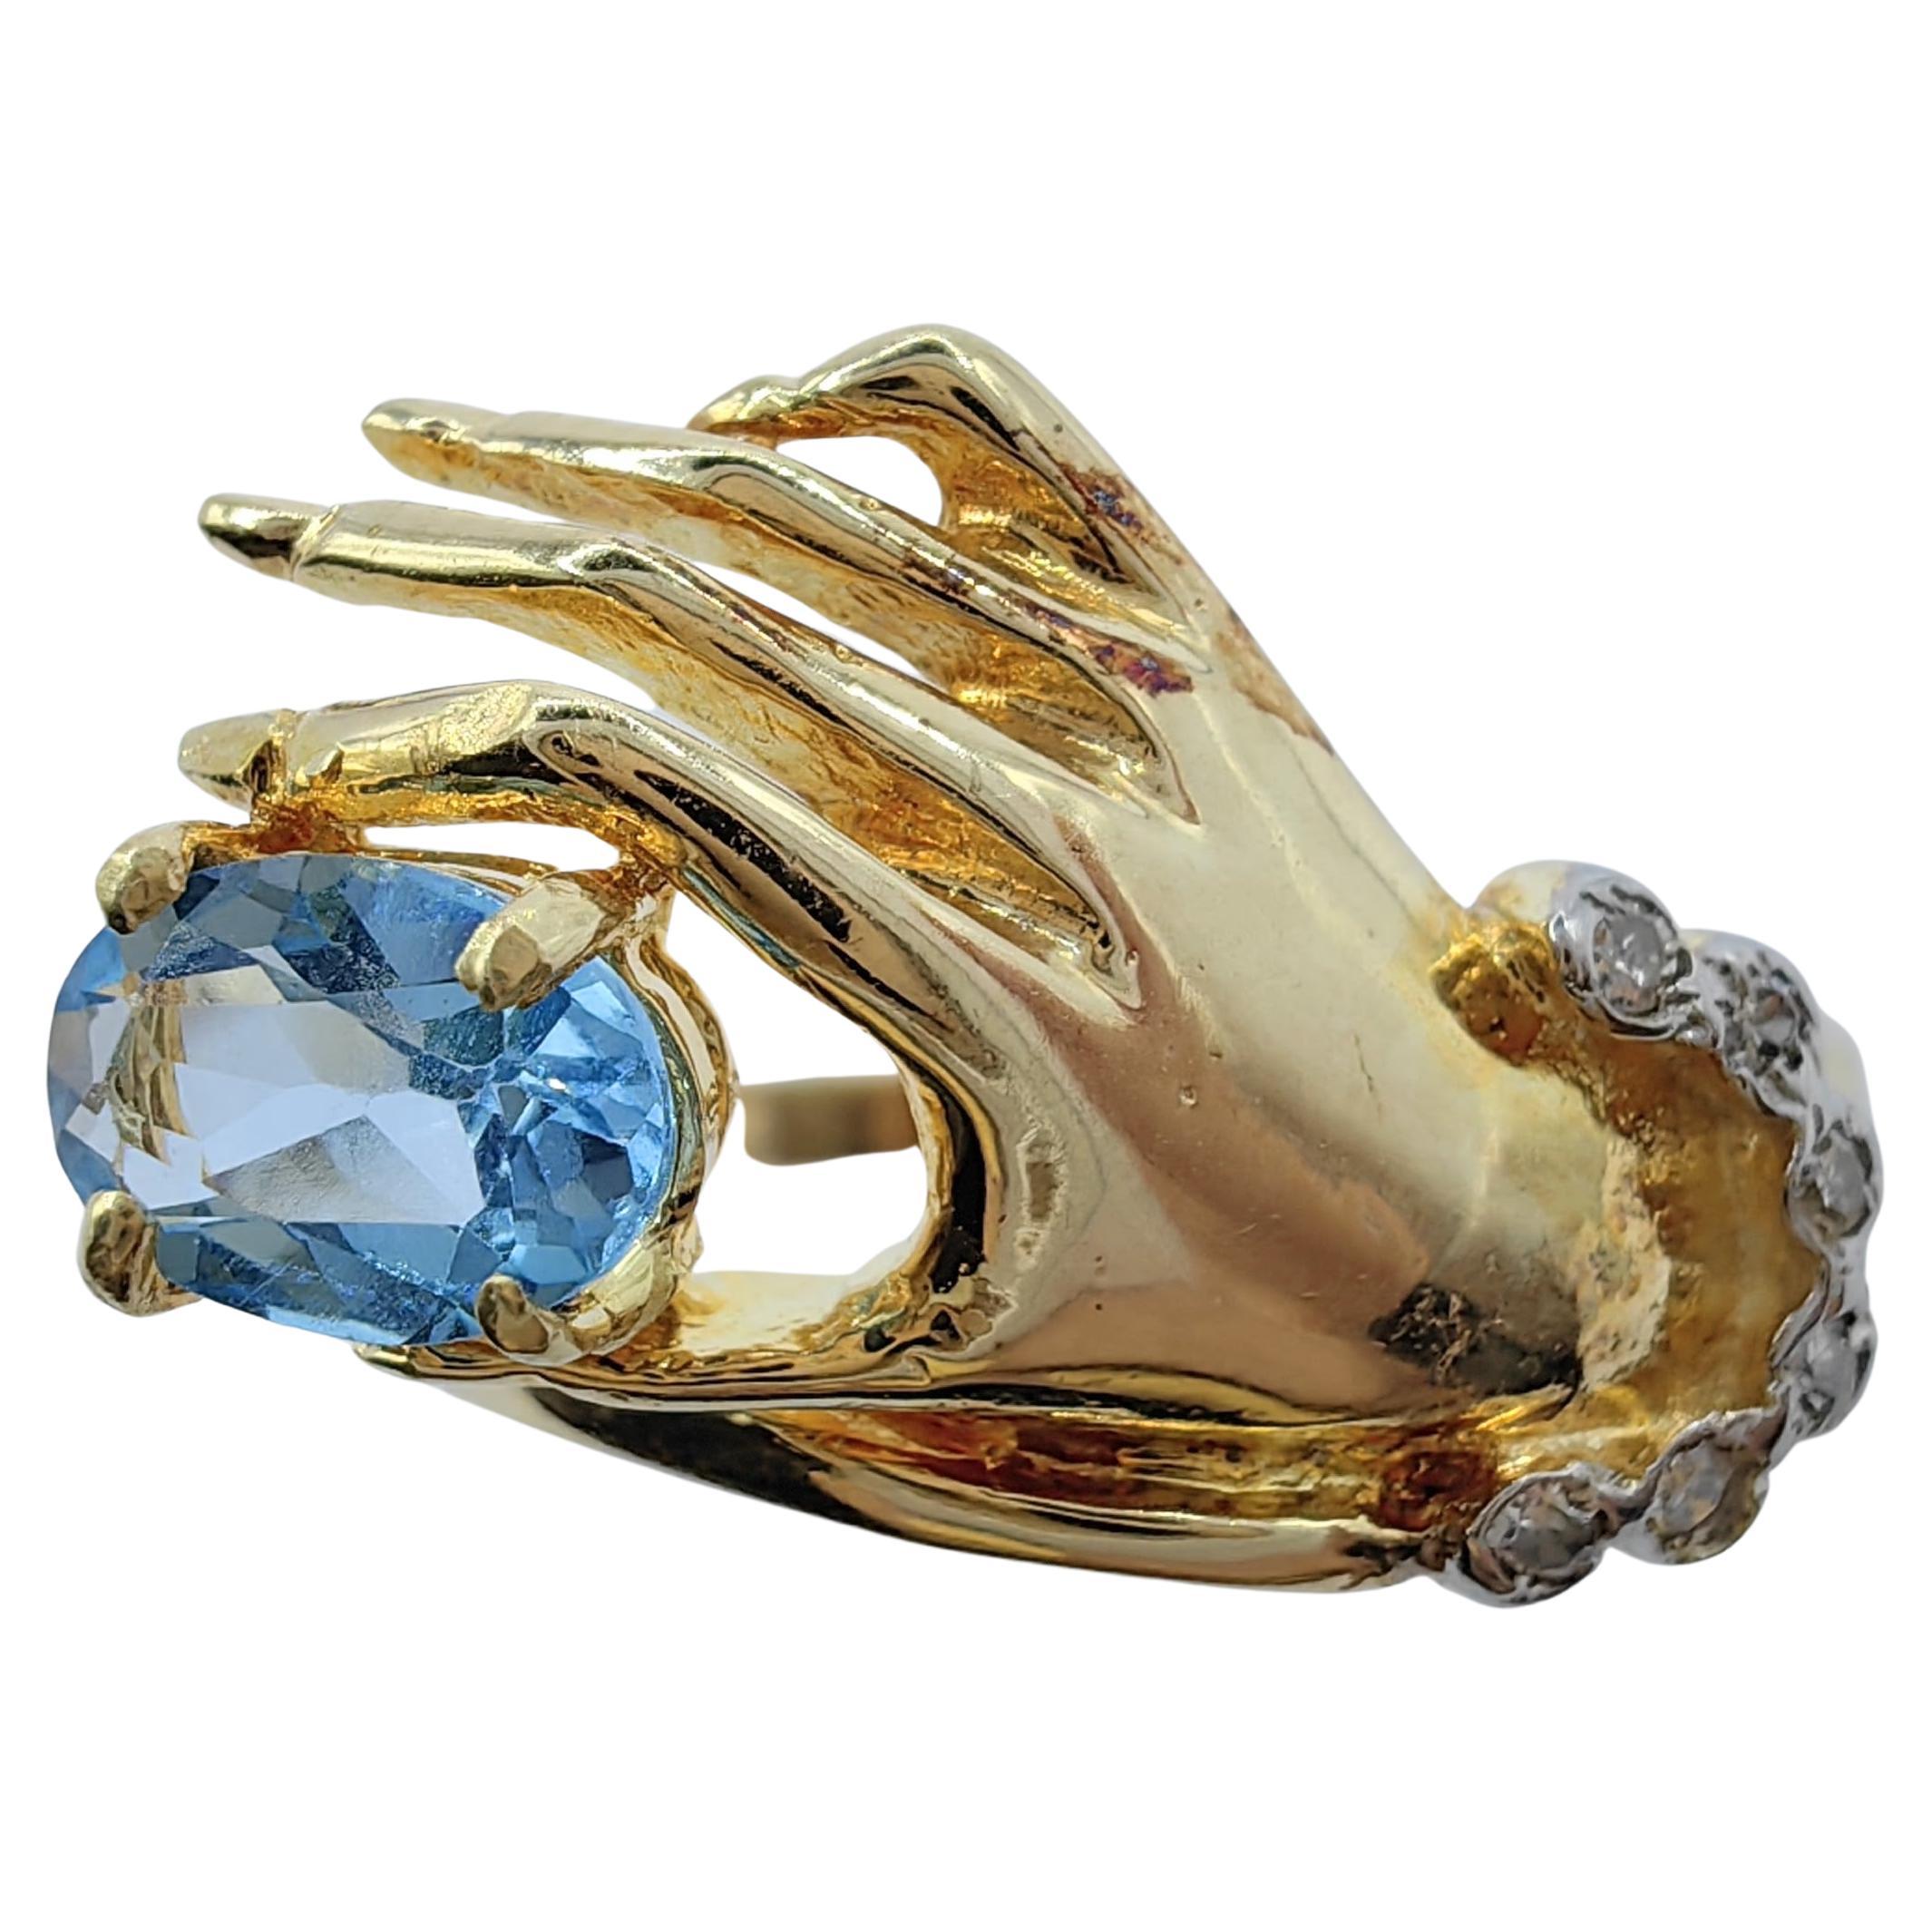 Oval-cut Blue Topaz in a Hand Diamond Ring in 14K Yellow Gold